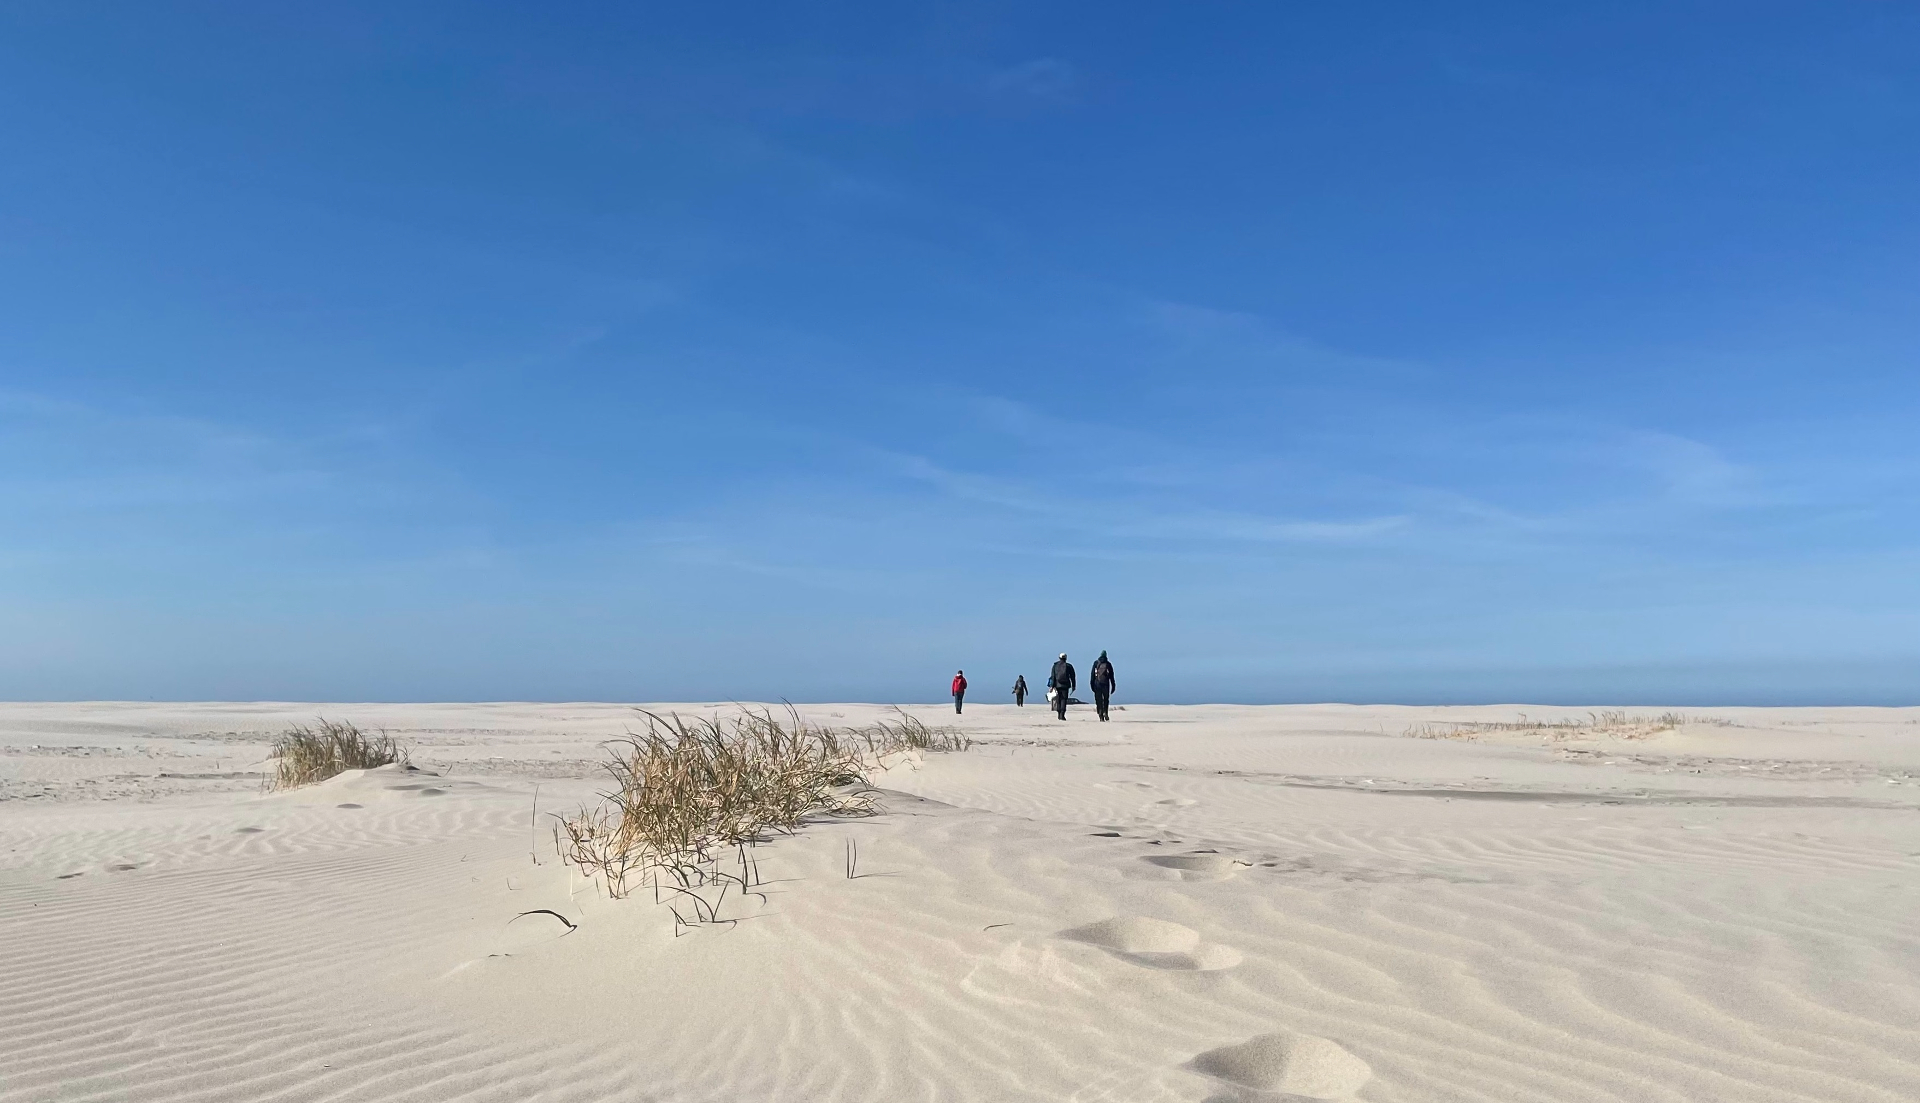 Small dunes formed by sand couch during monitoring of a field experiment on the Balg, Schiermonnikoog. Credit: Carlijn Lammers